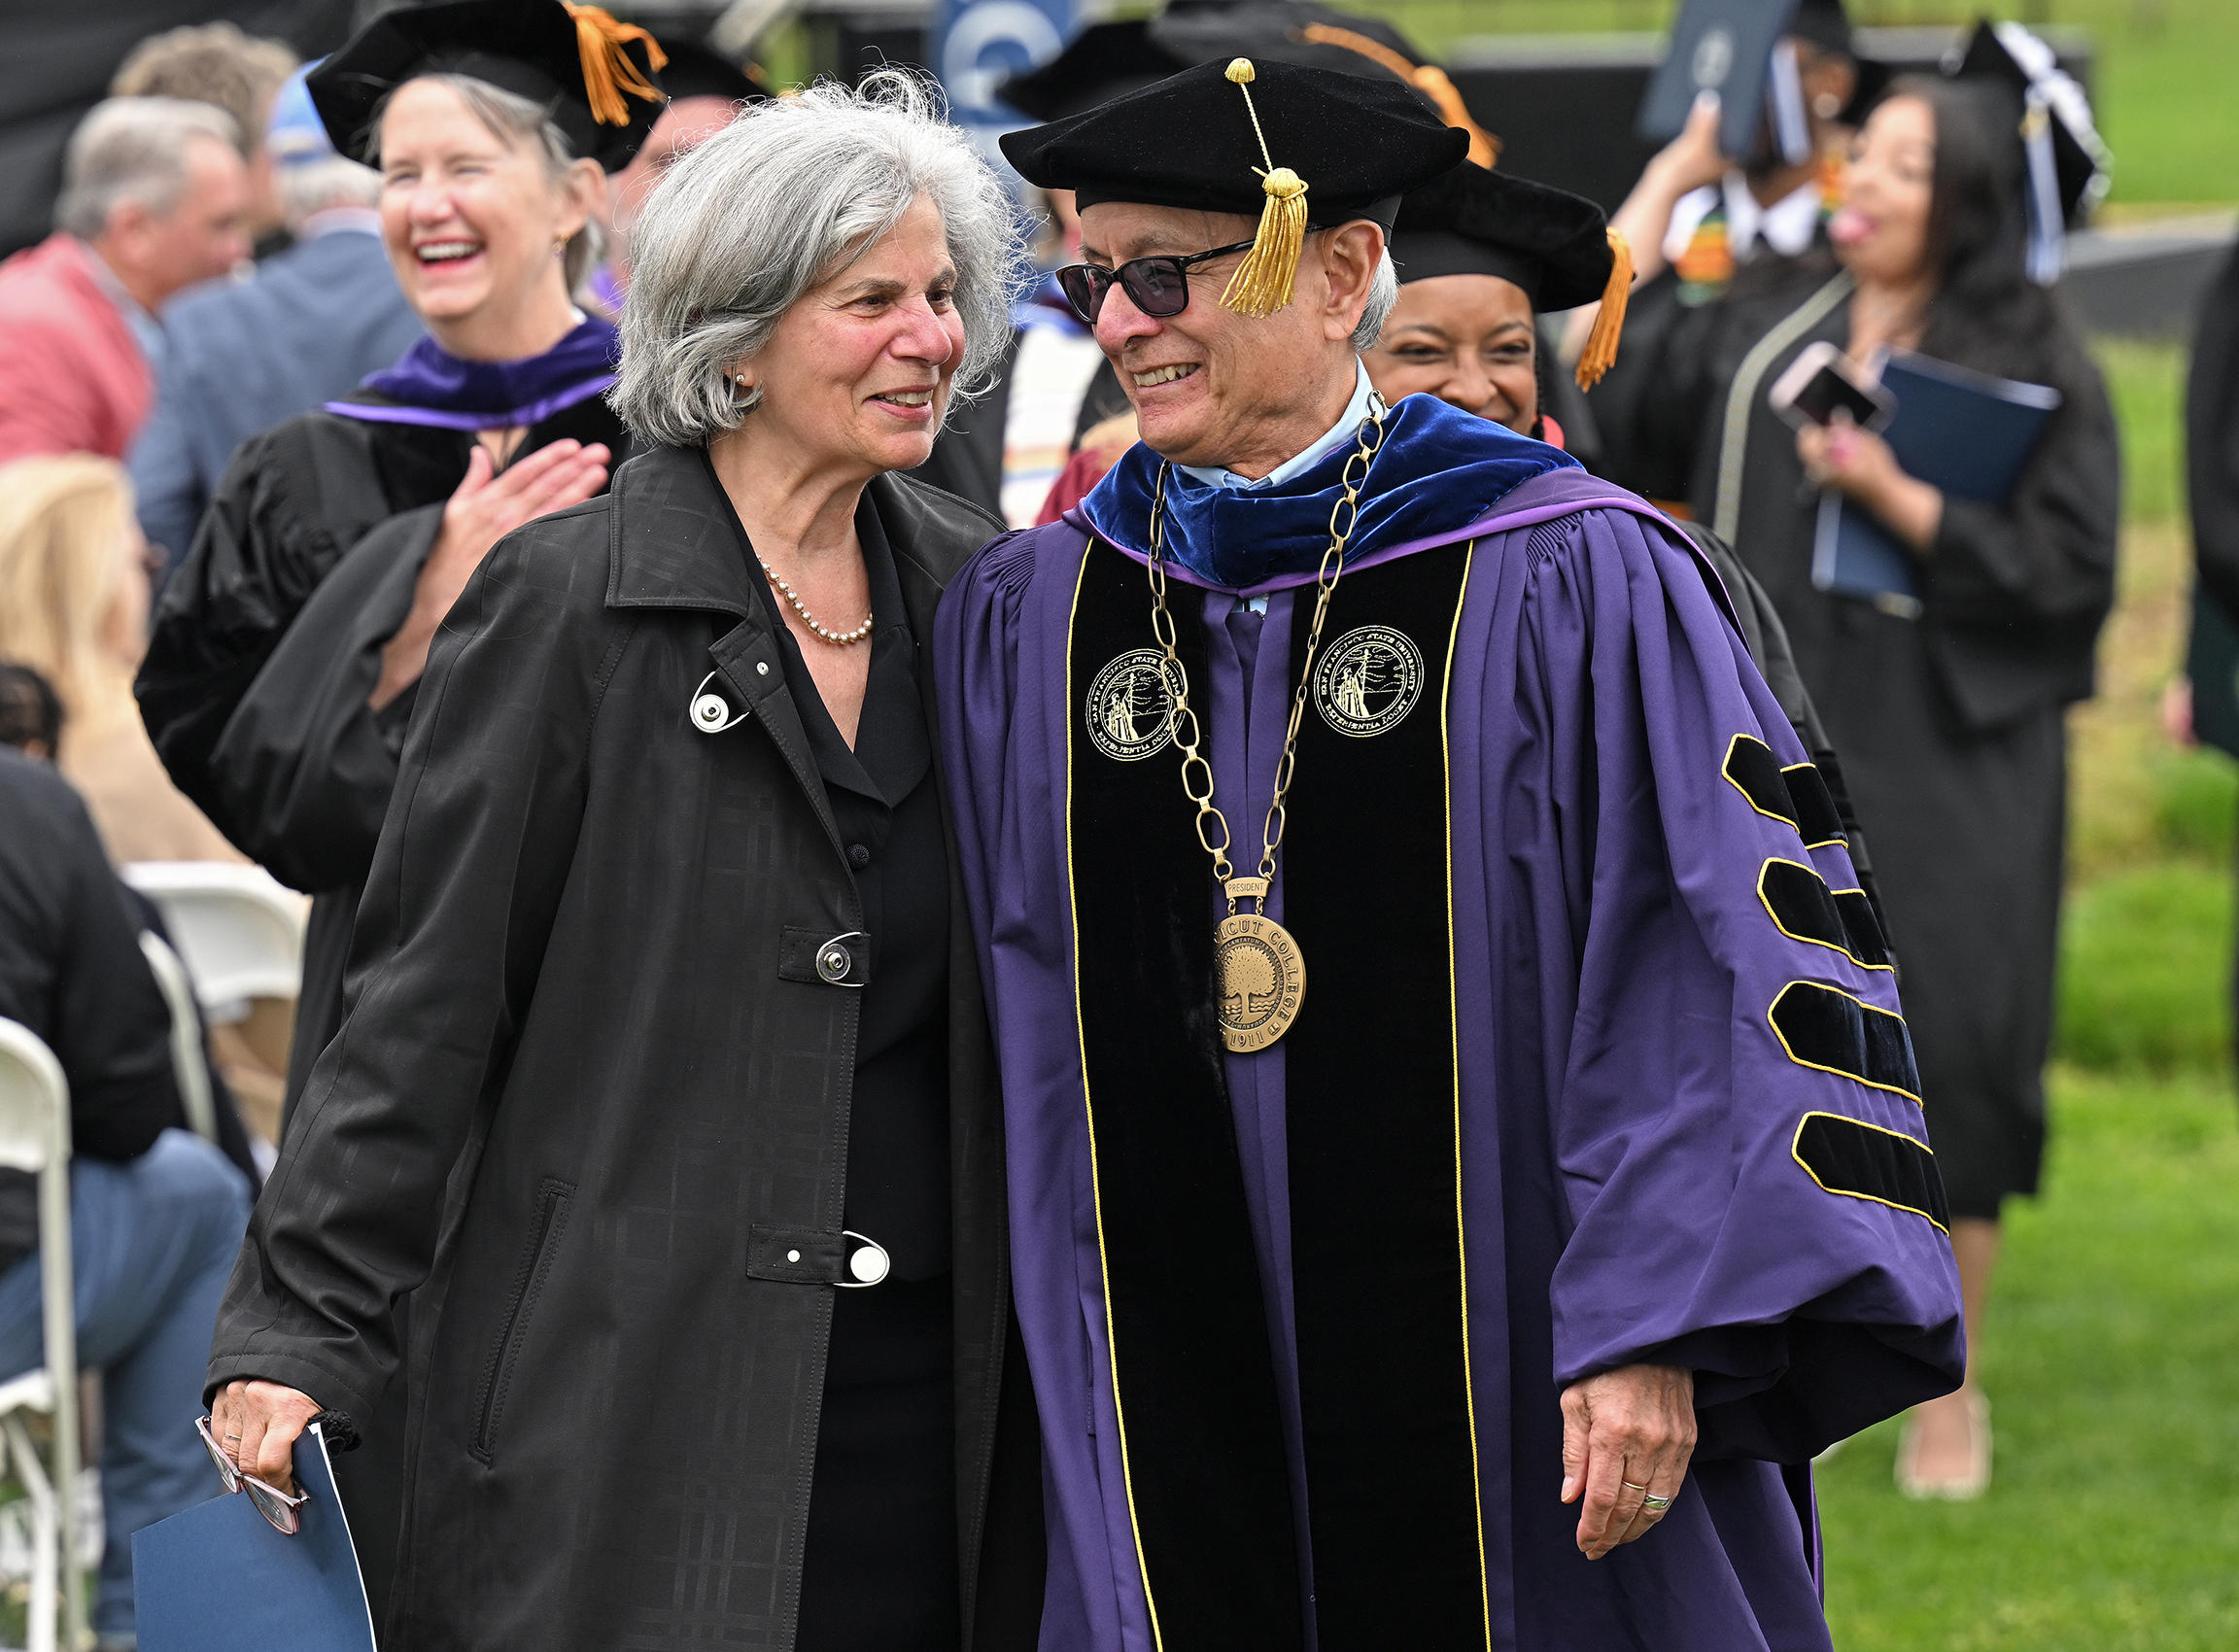 A college president in full academic regalia and his wife walk off the field together following commencement exercises